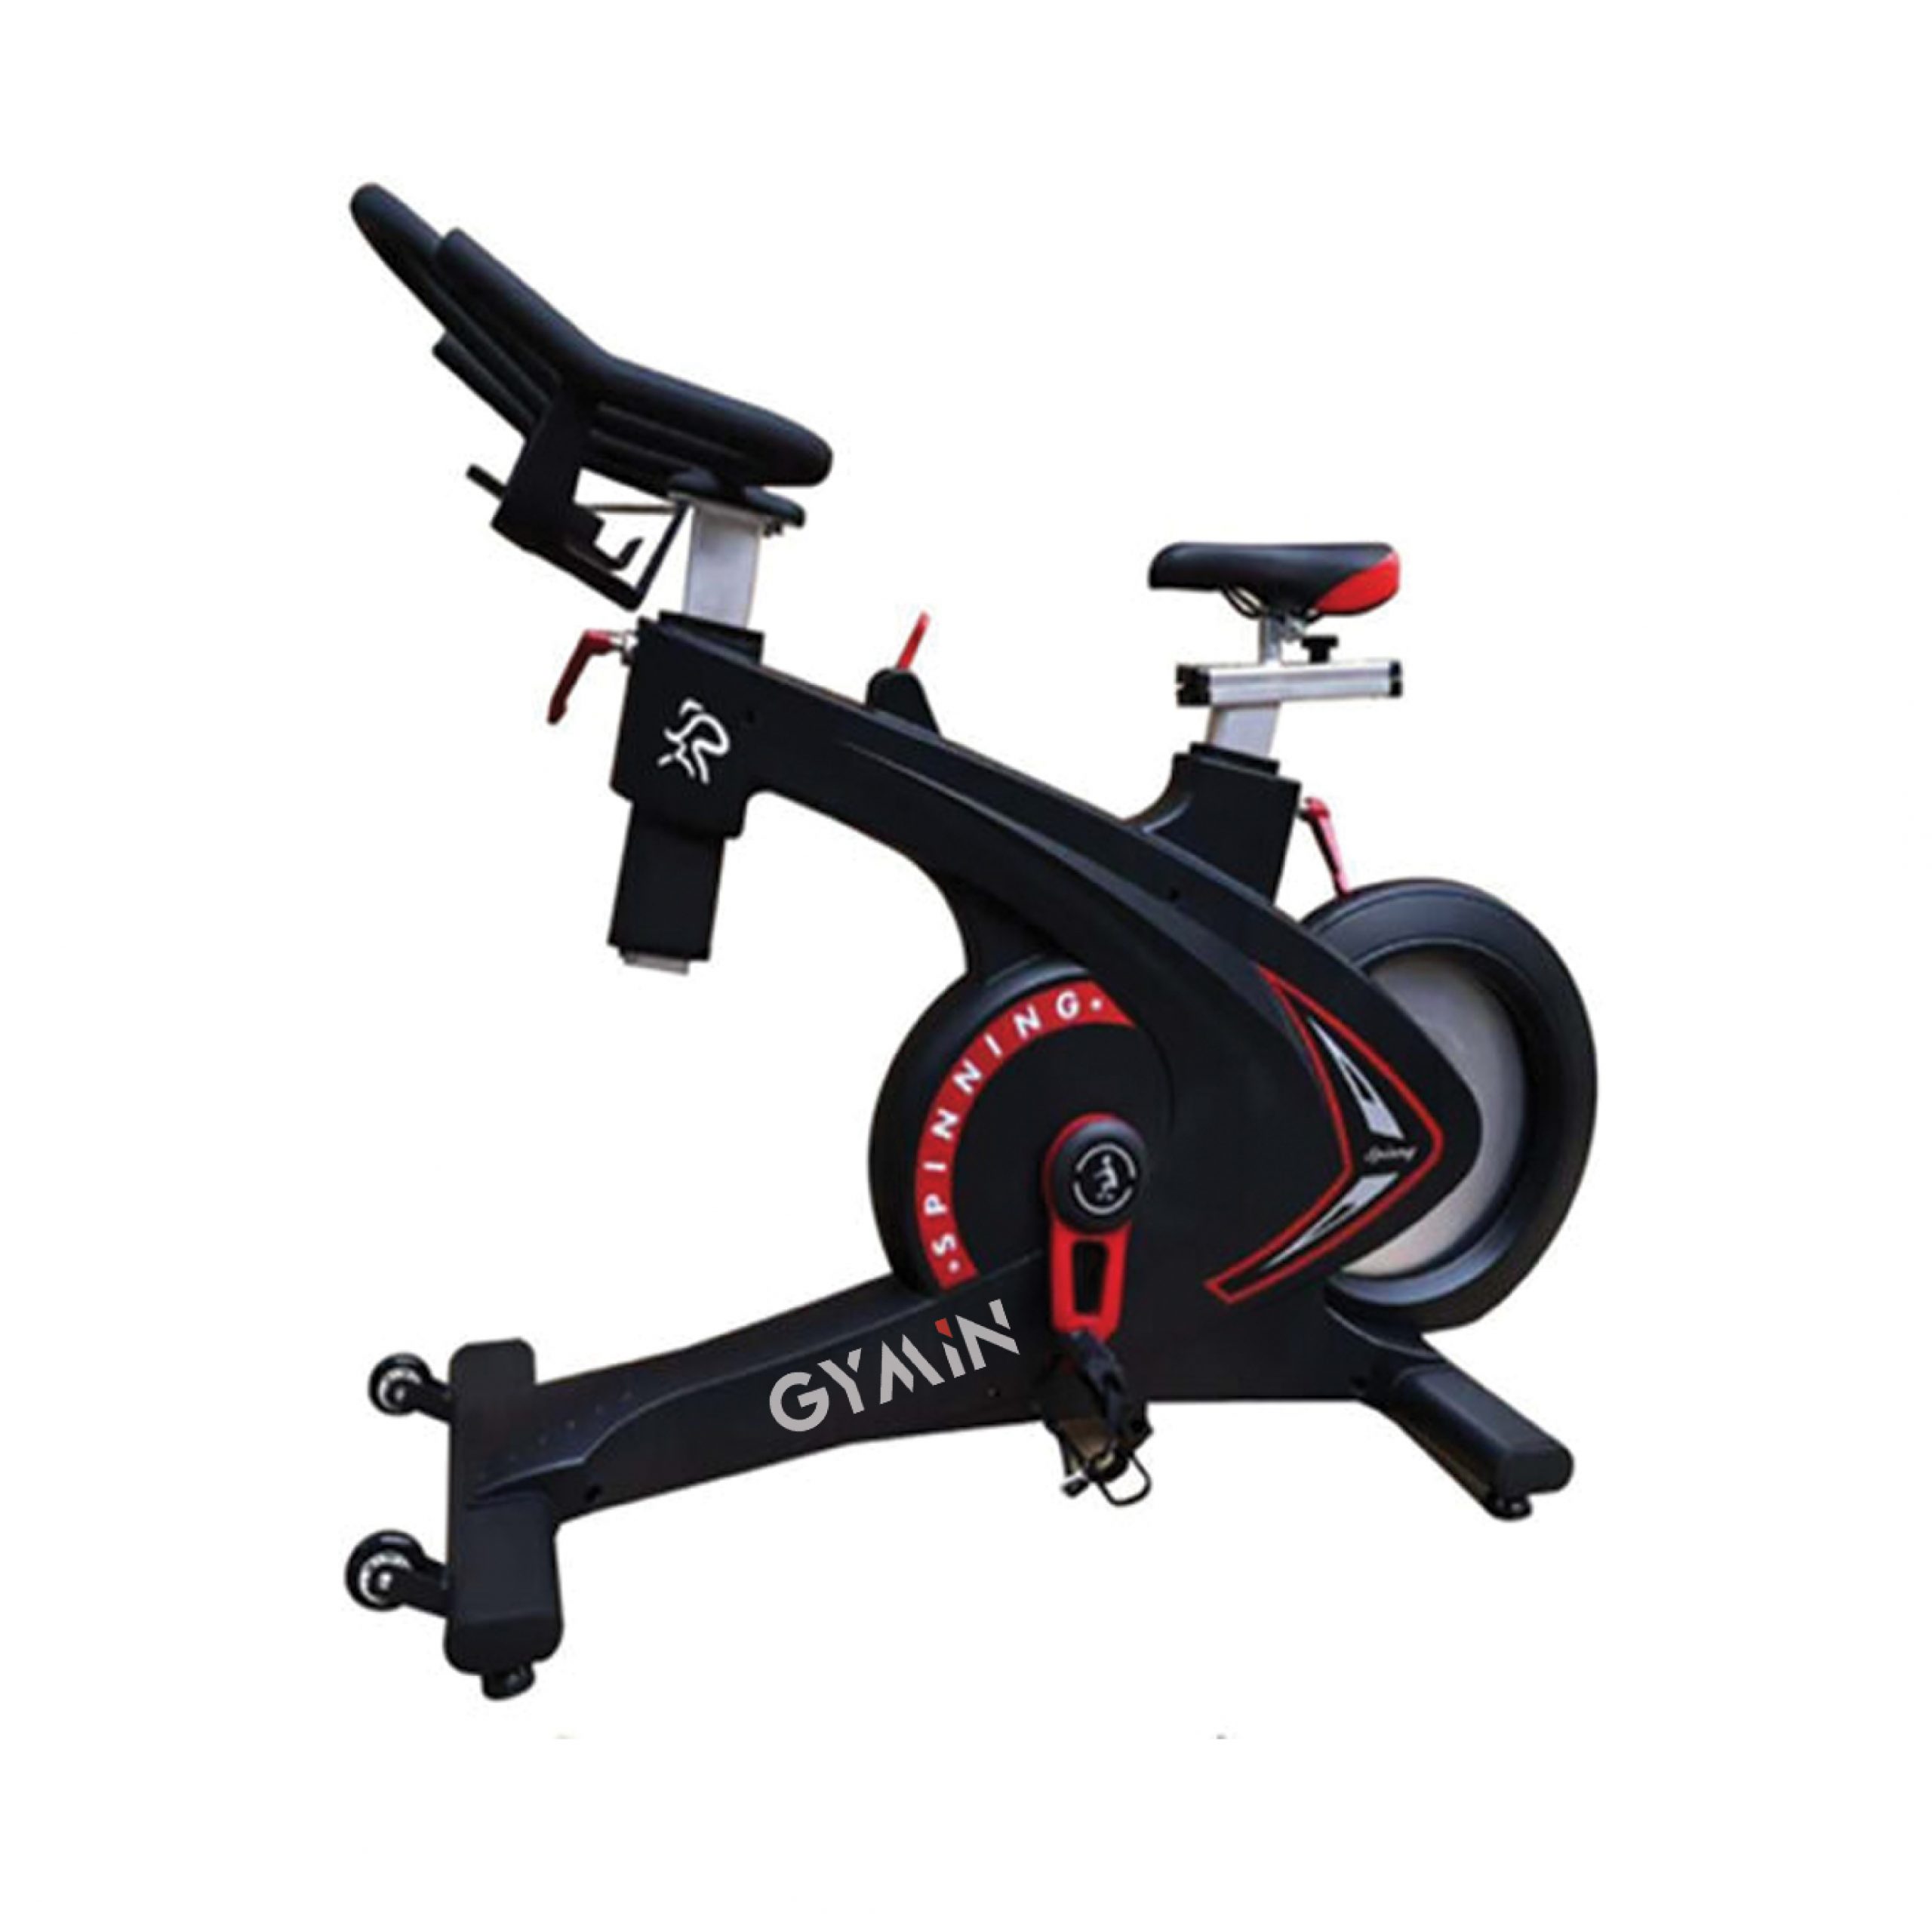 Commercial Spin Bike - GS Sports